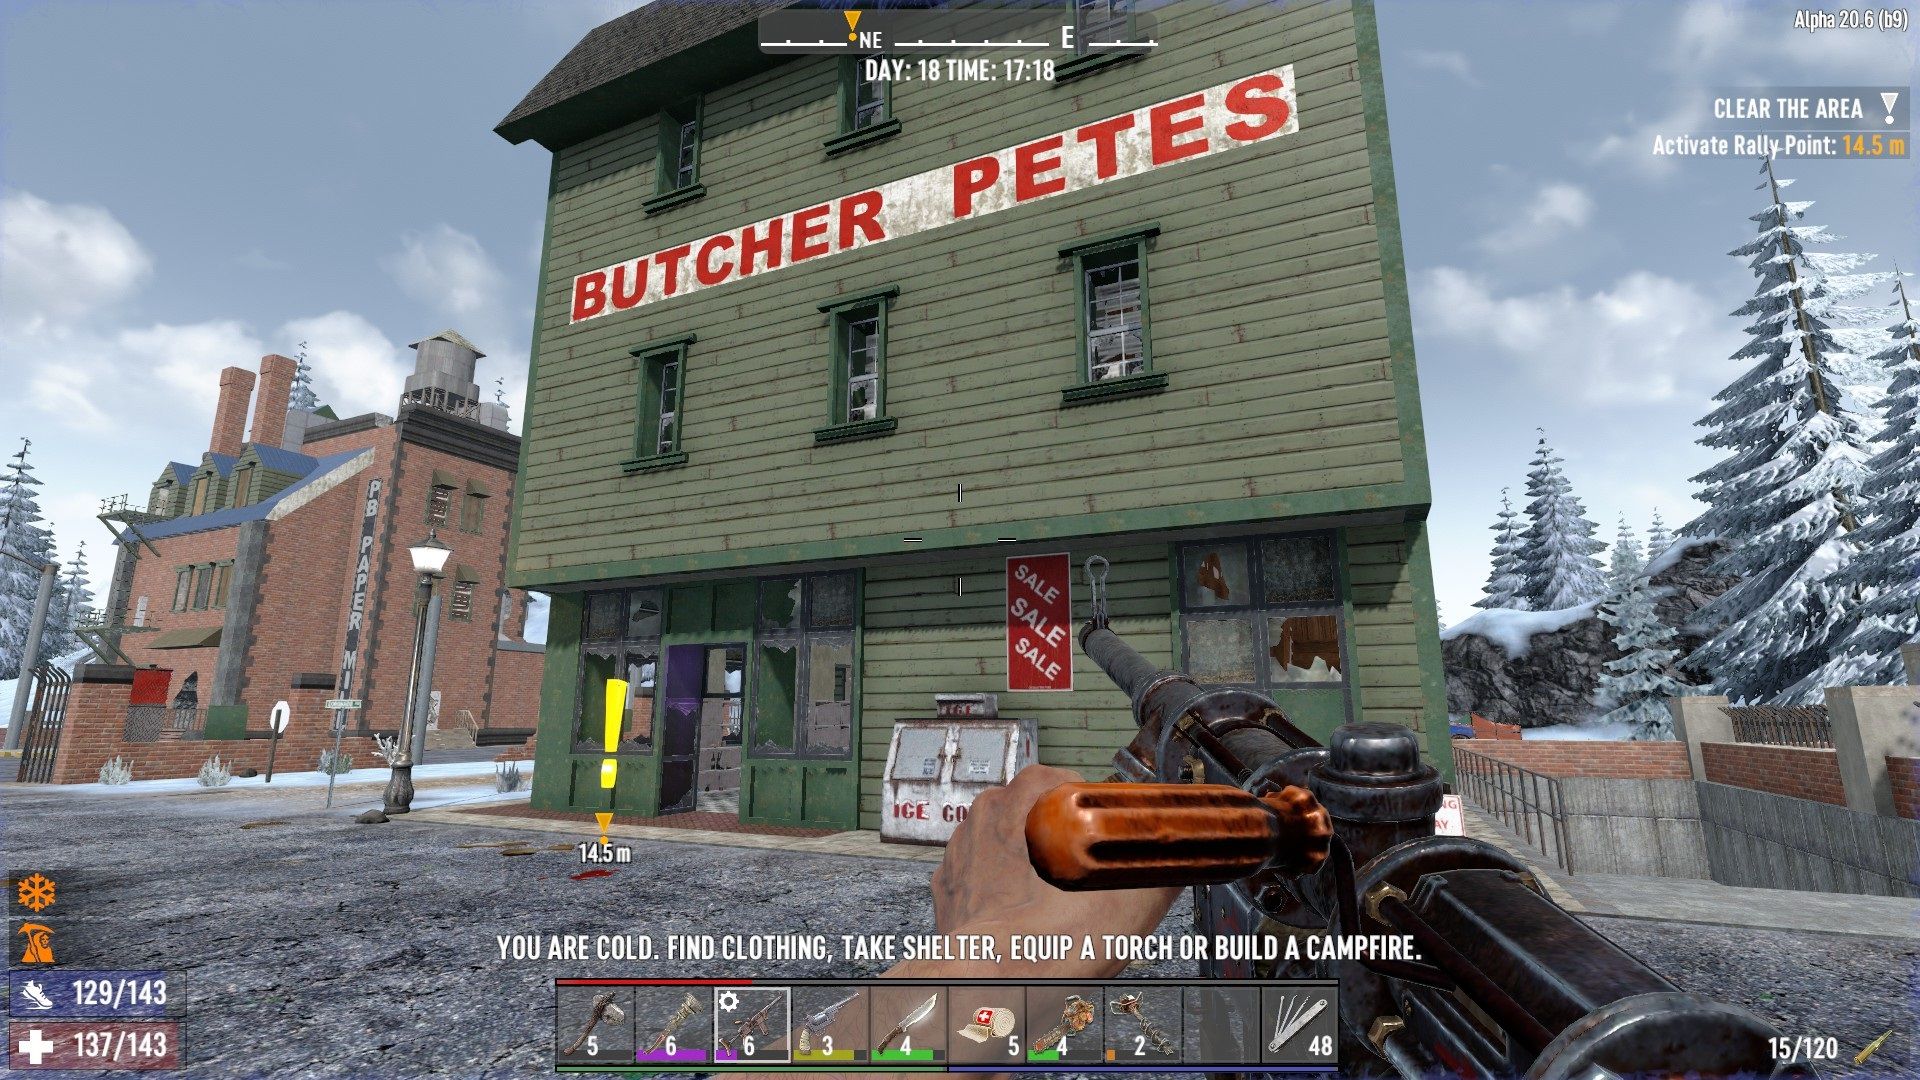 clearing out the butcher petes shop.jpg